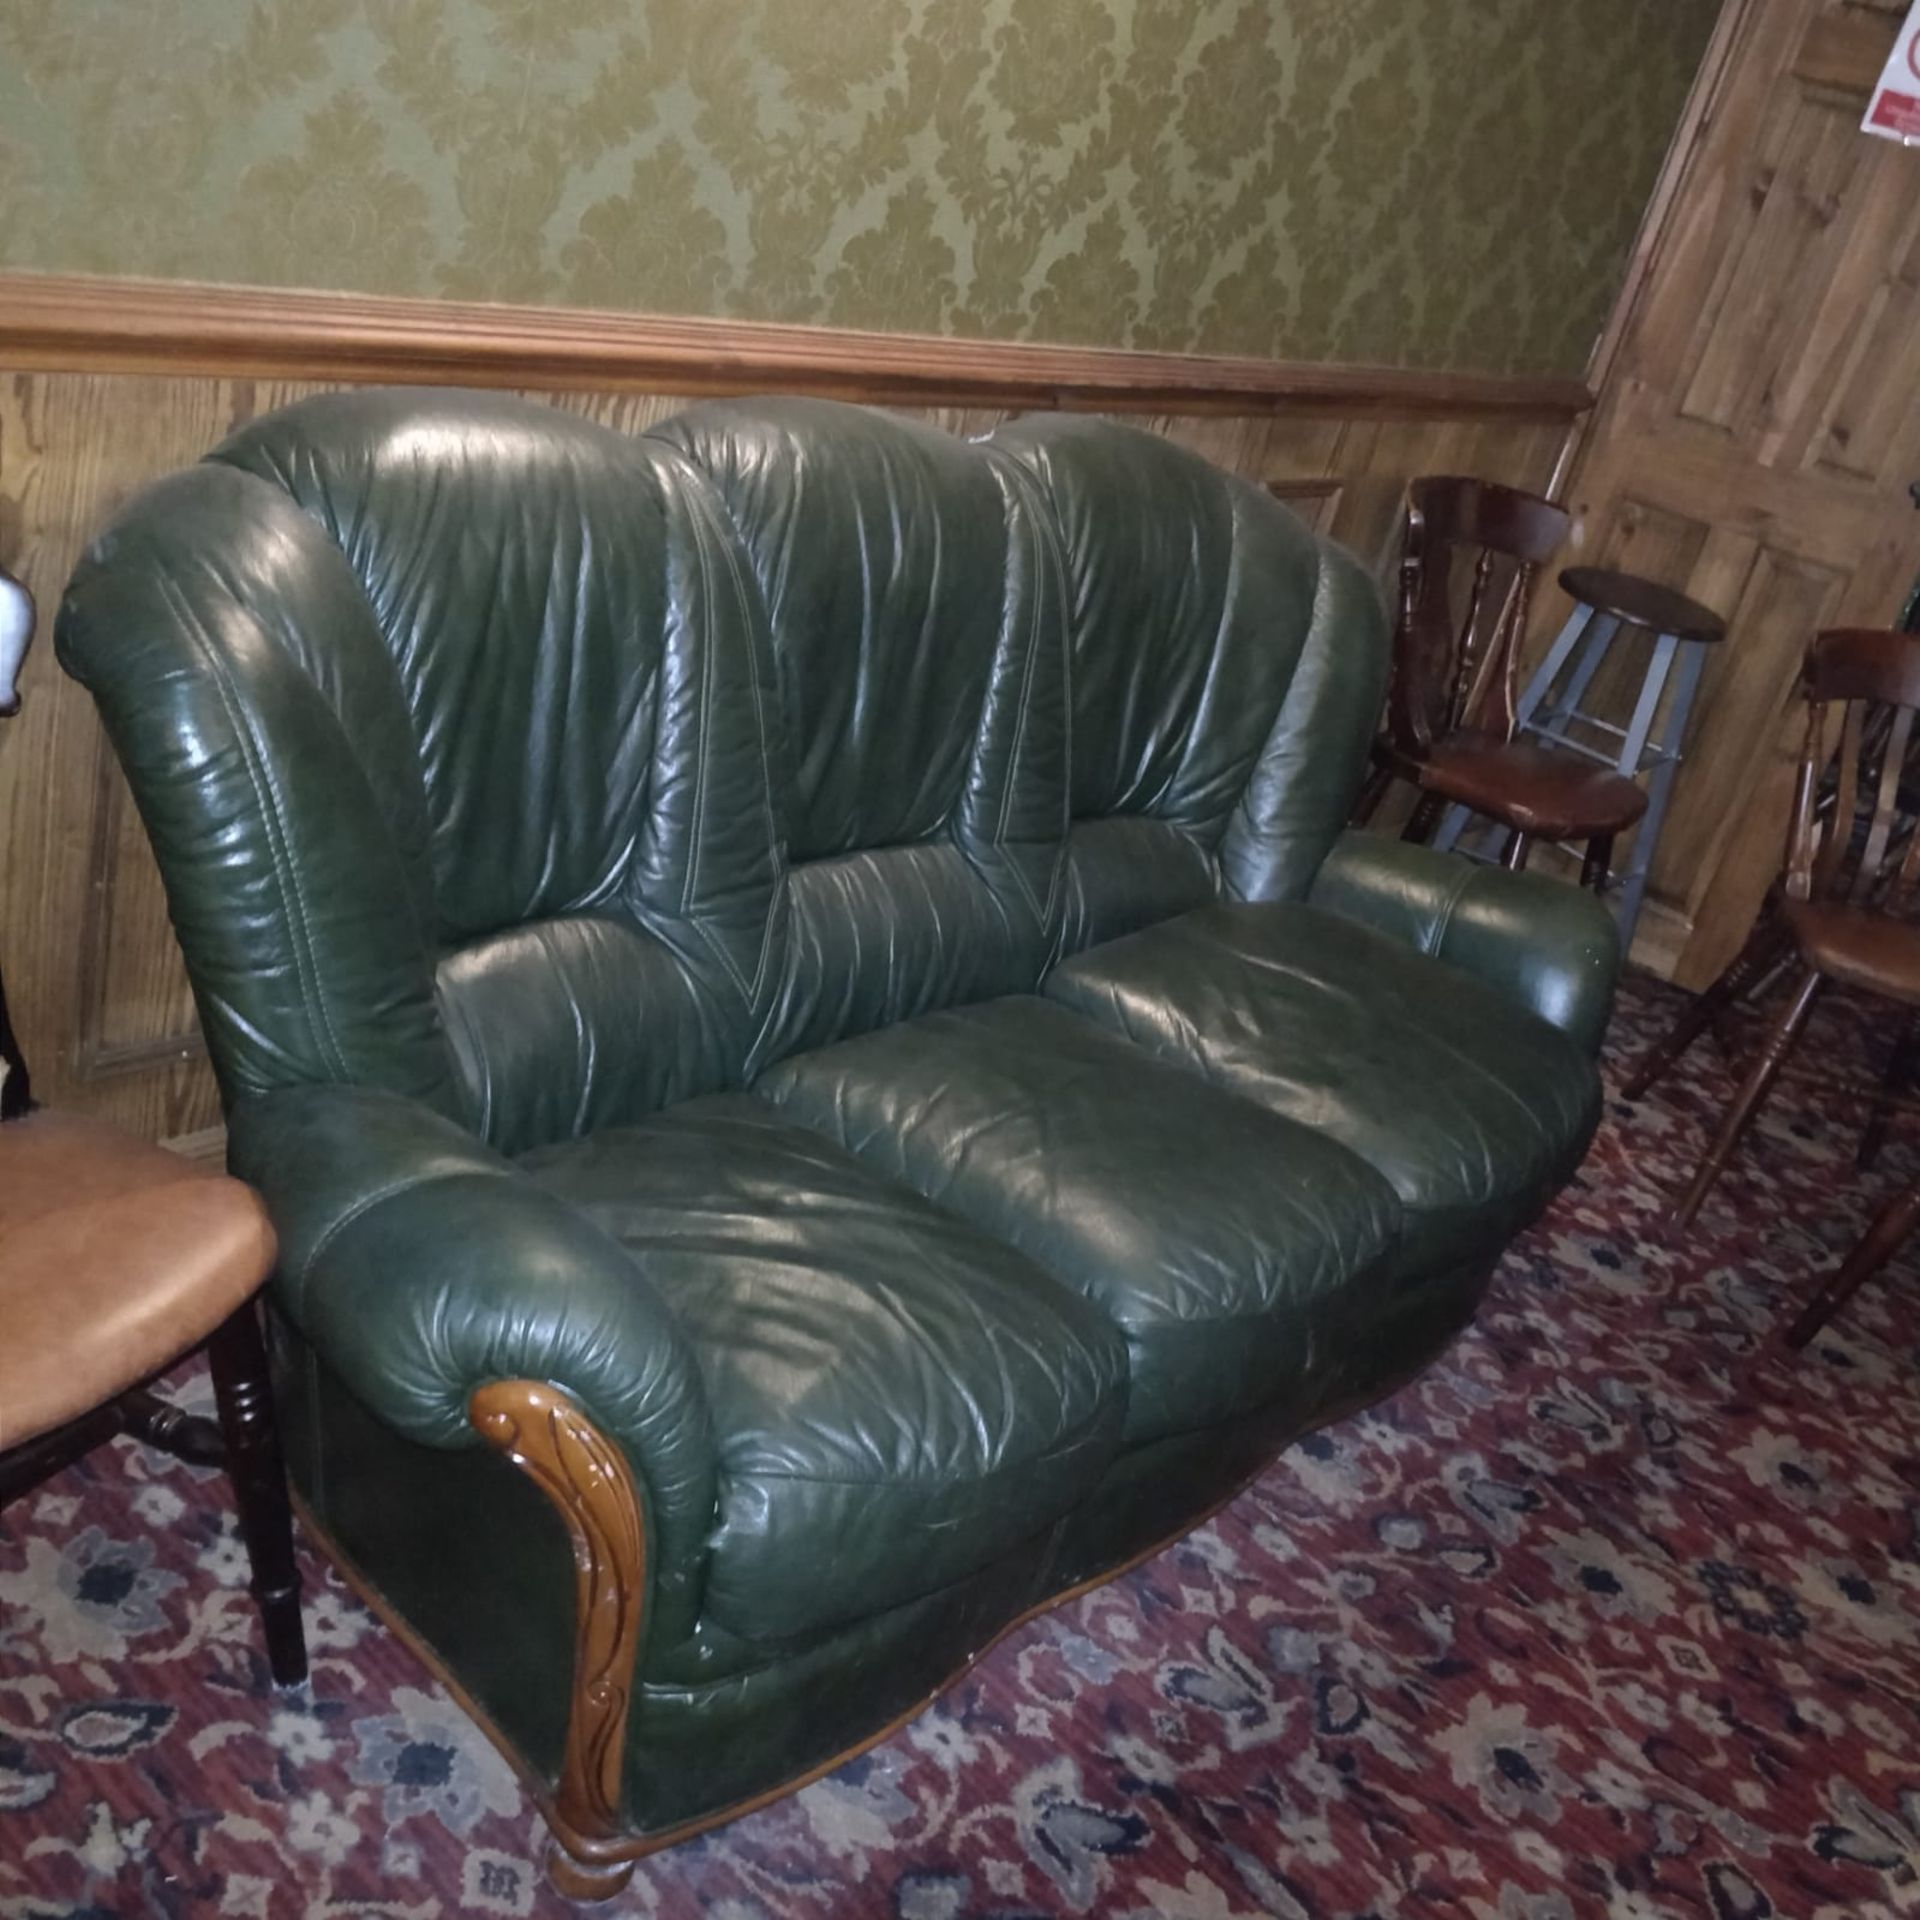 1 x Sofa - Green Leather With Wood Detail - CL586 - Location: Stockport SK1 This item is to be - Image 2 of 2